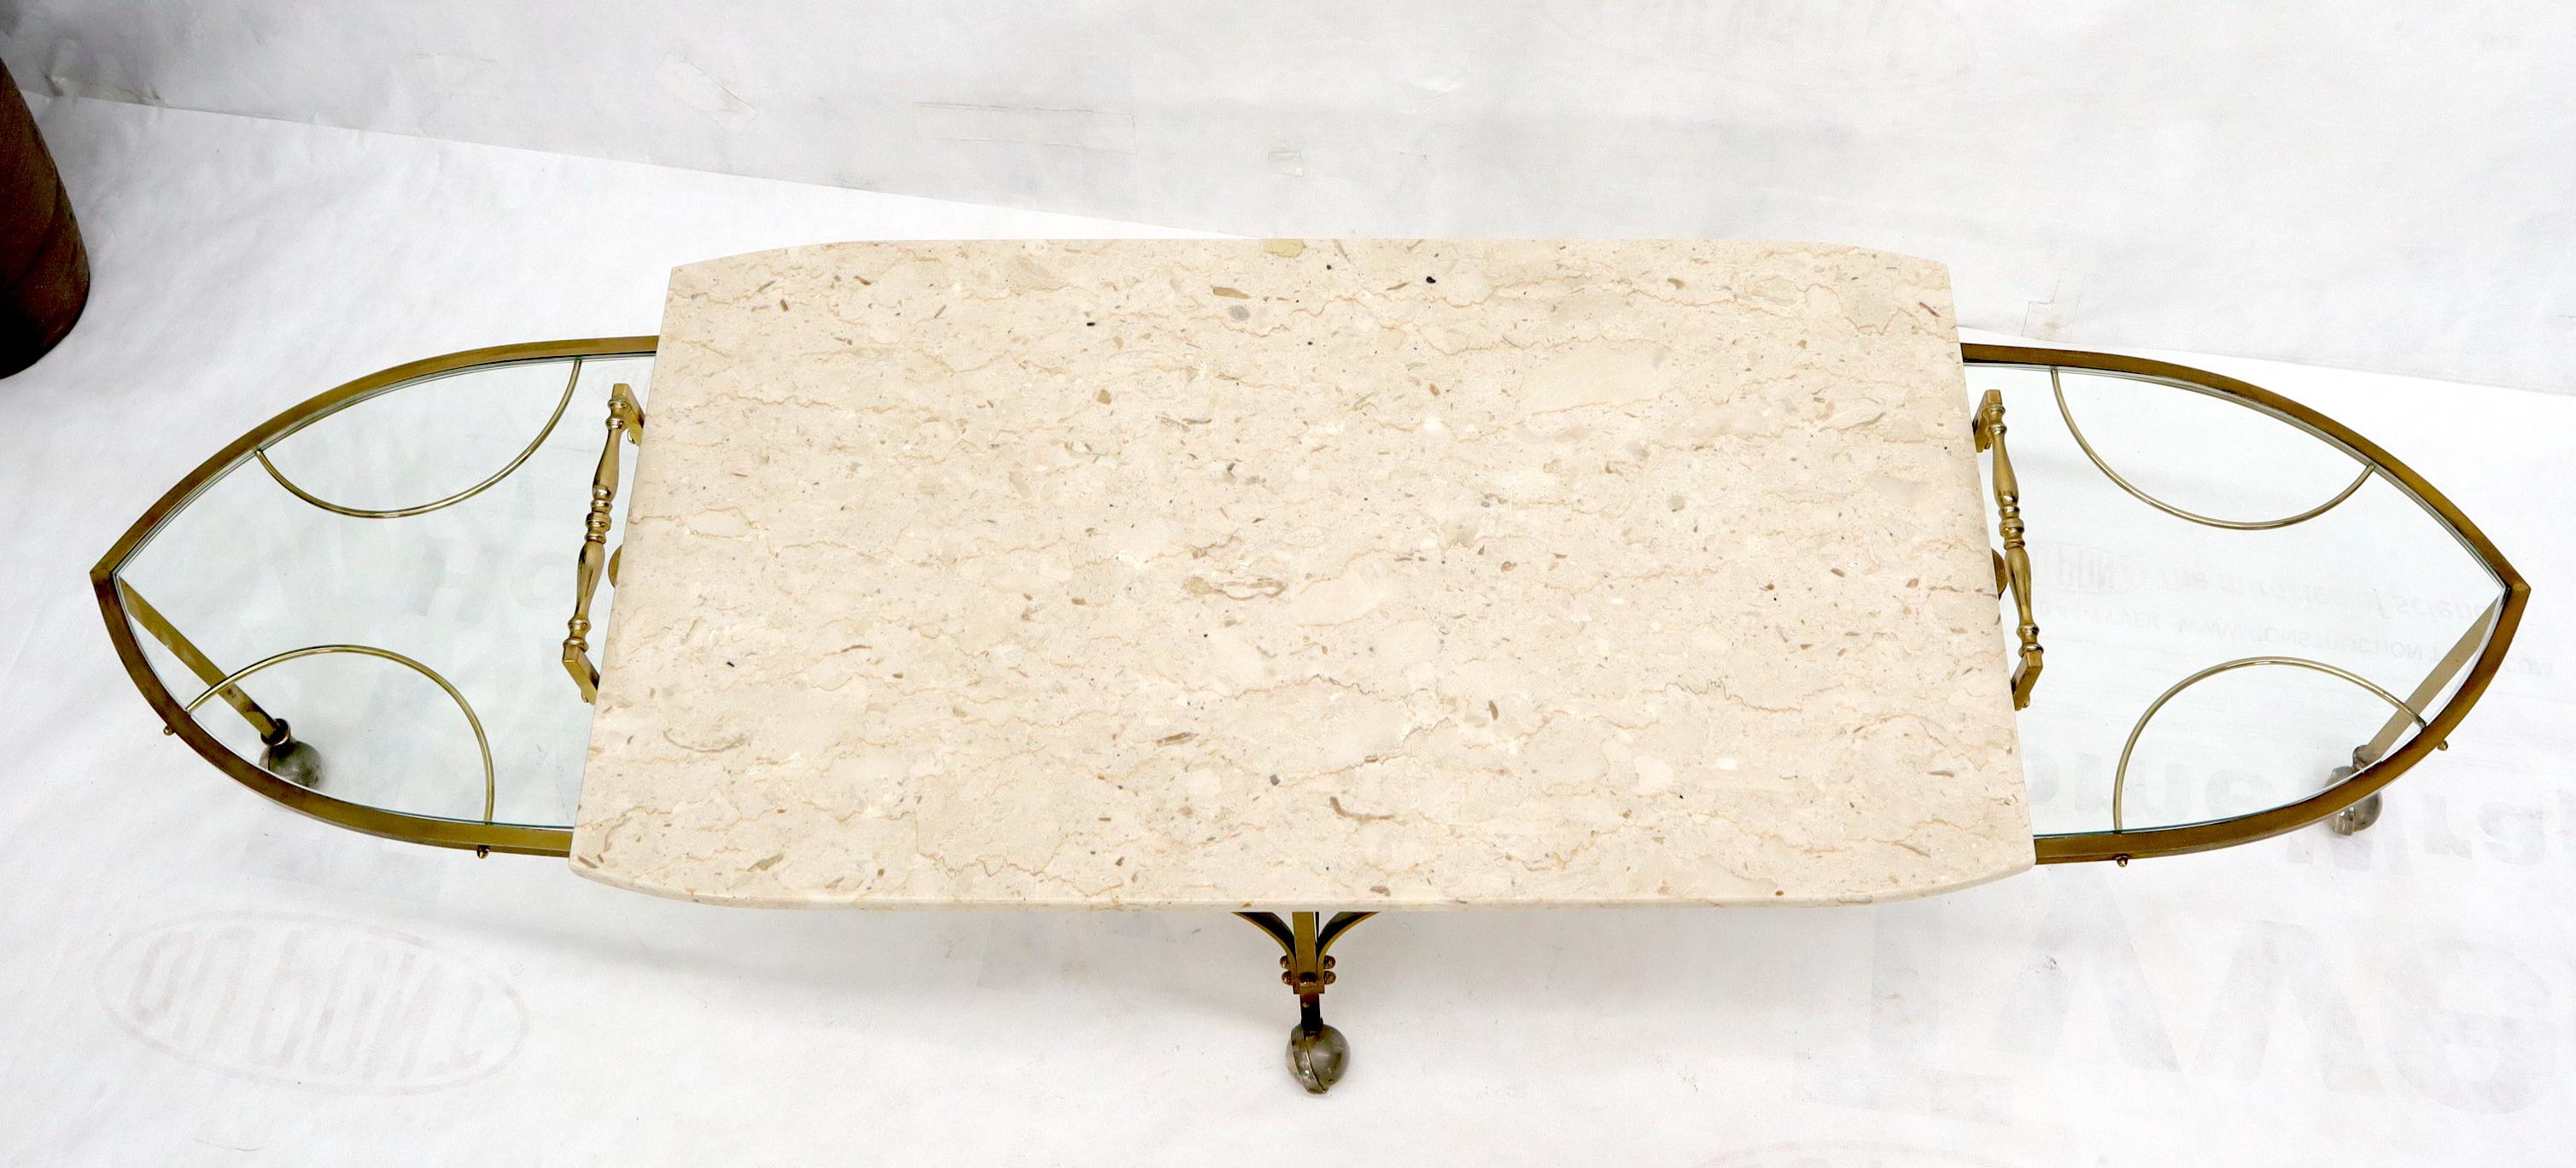 20th Century Mid-Century Modern Brass Base on Wheels Travertine Top Expandable Coffee Table For Sale